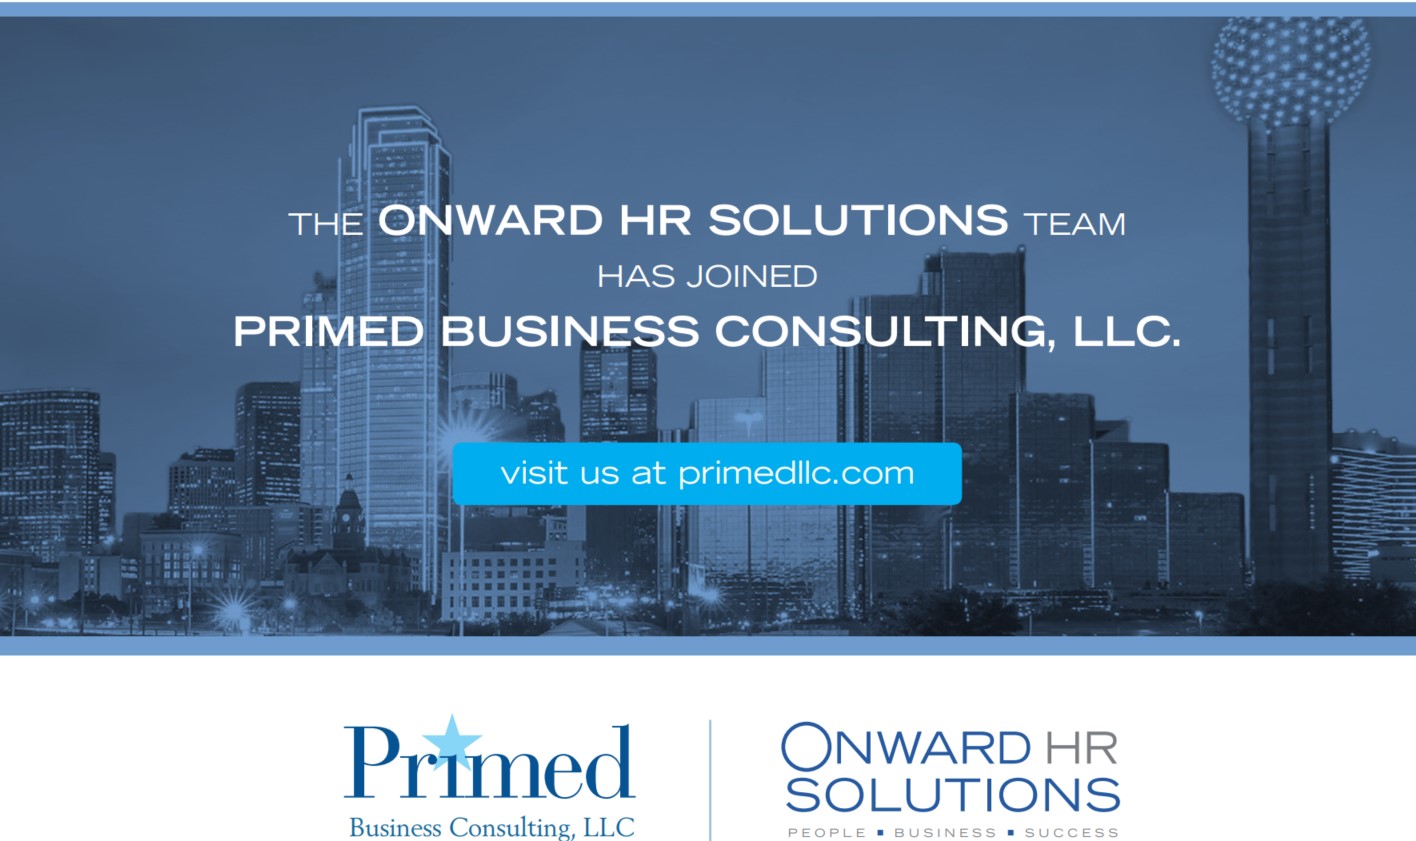 Onward Solutions has joined Primed Business Consulting